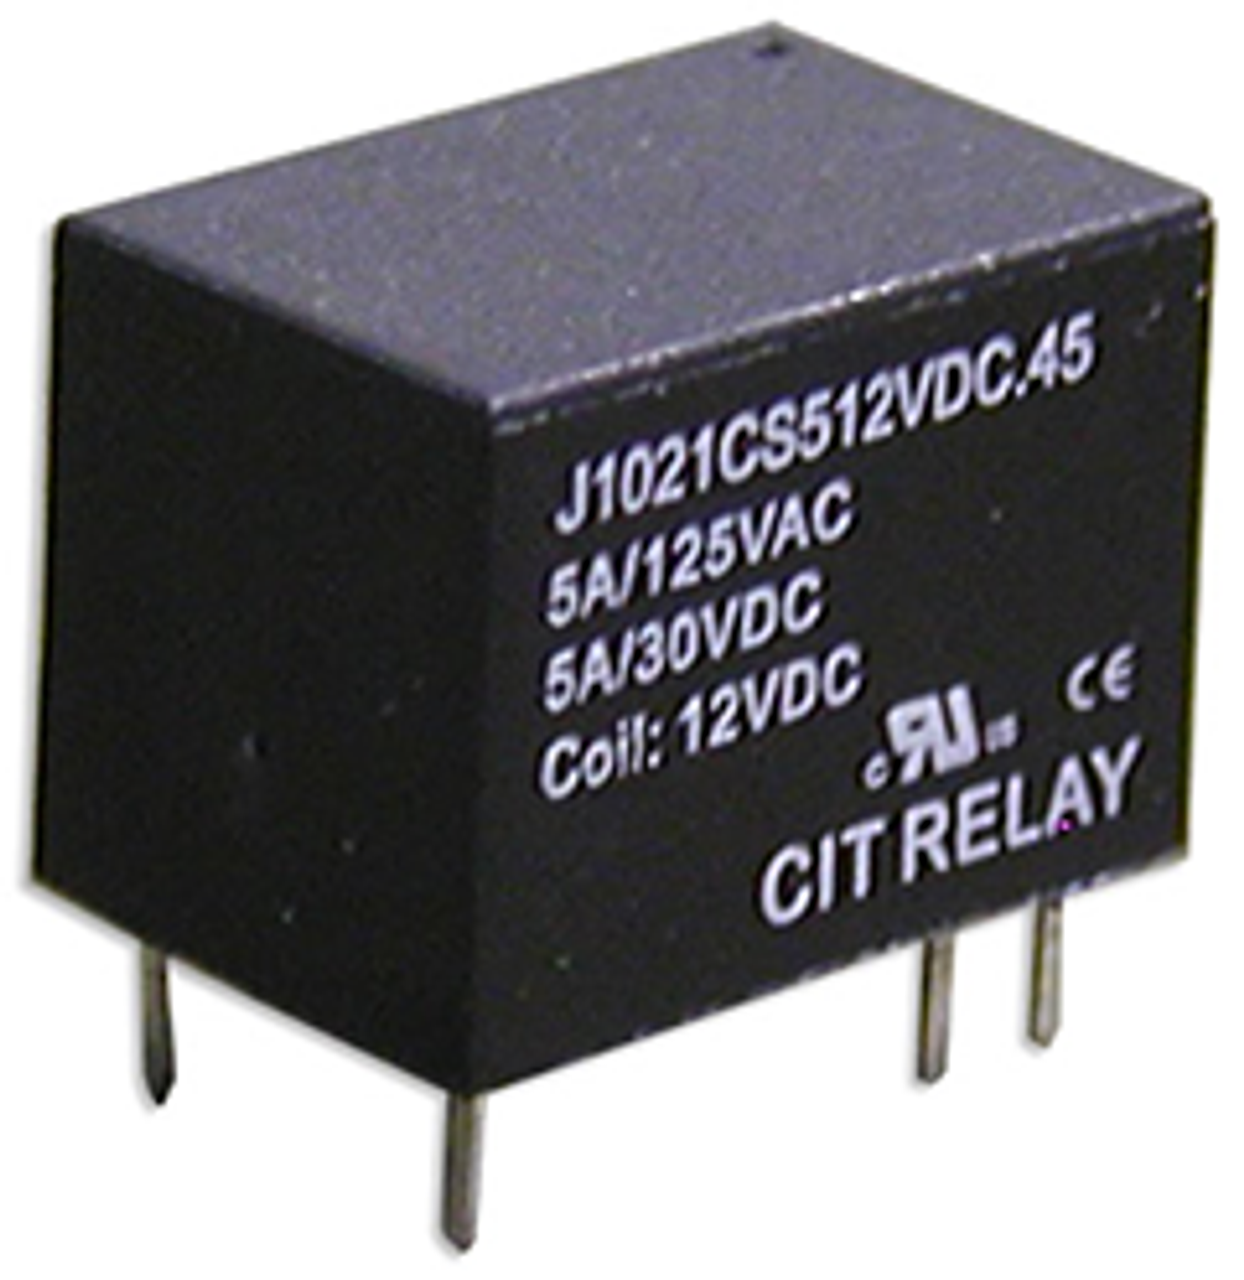 CIT Relay and Switch J1021AS3P12VDC.36 Power Relays